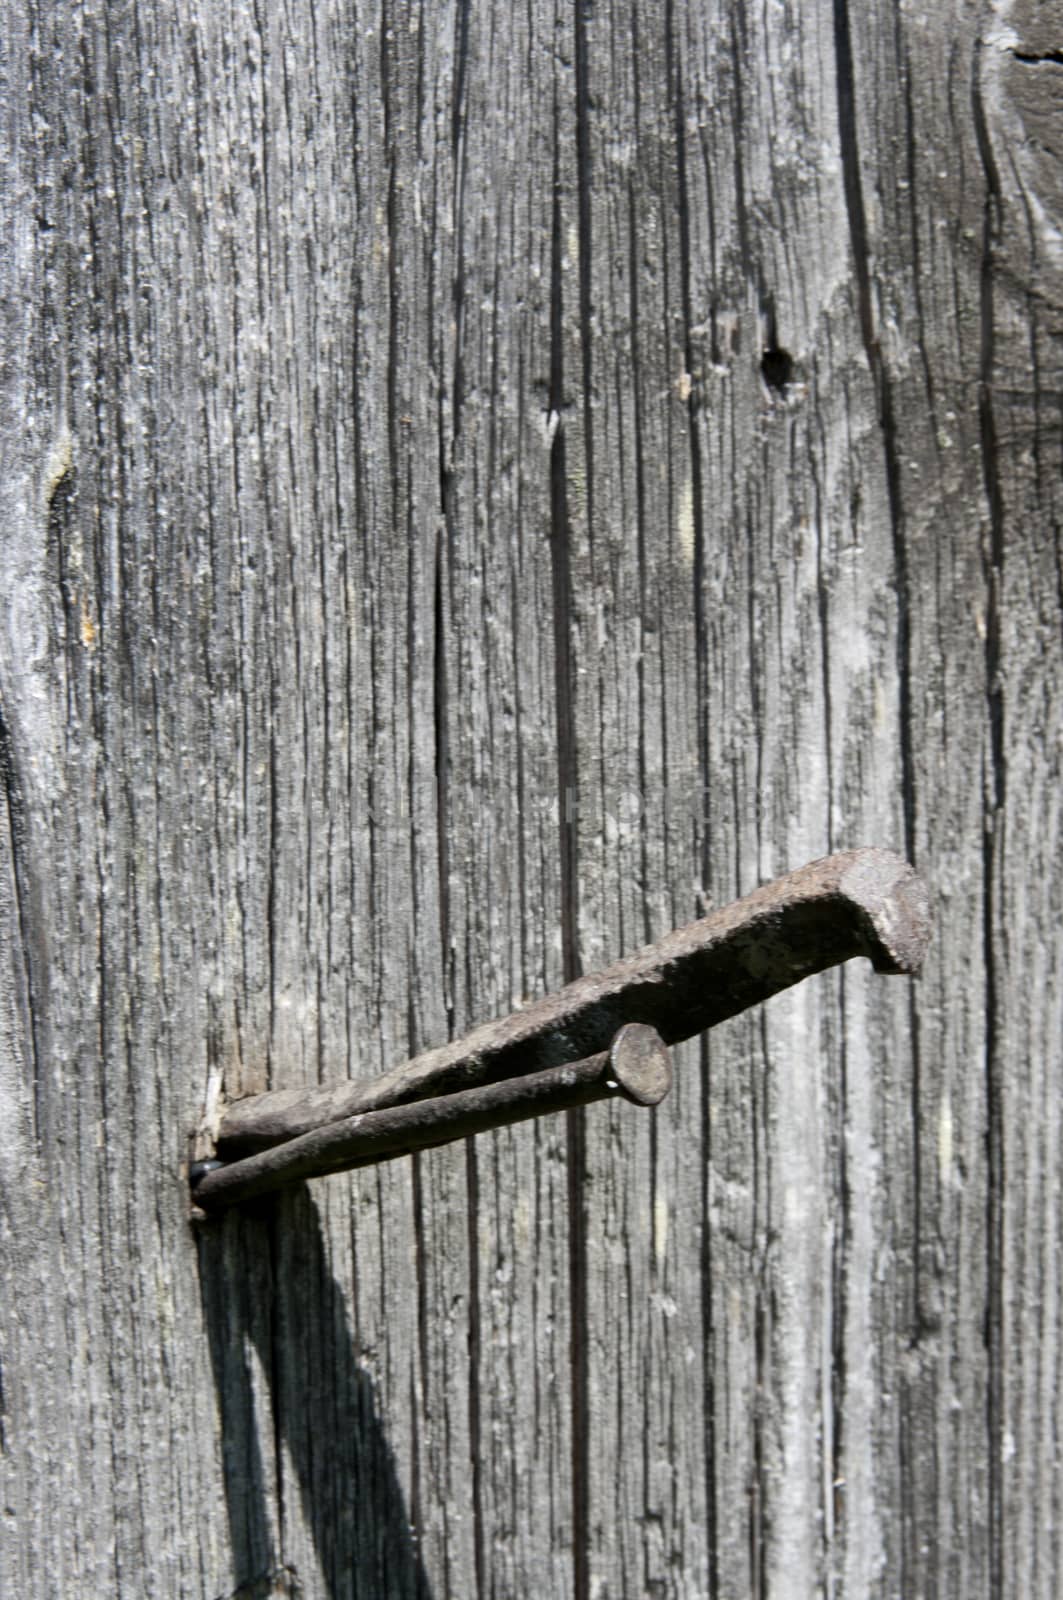 texture of old wood wall in a village house